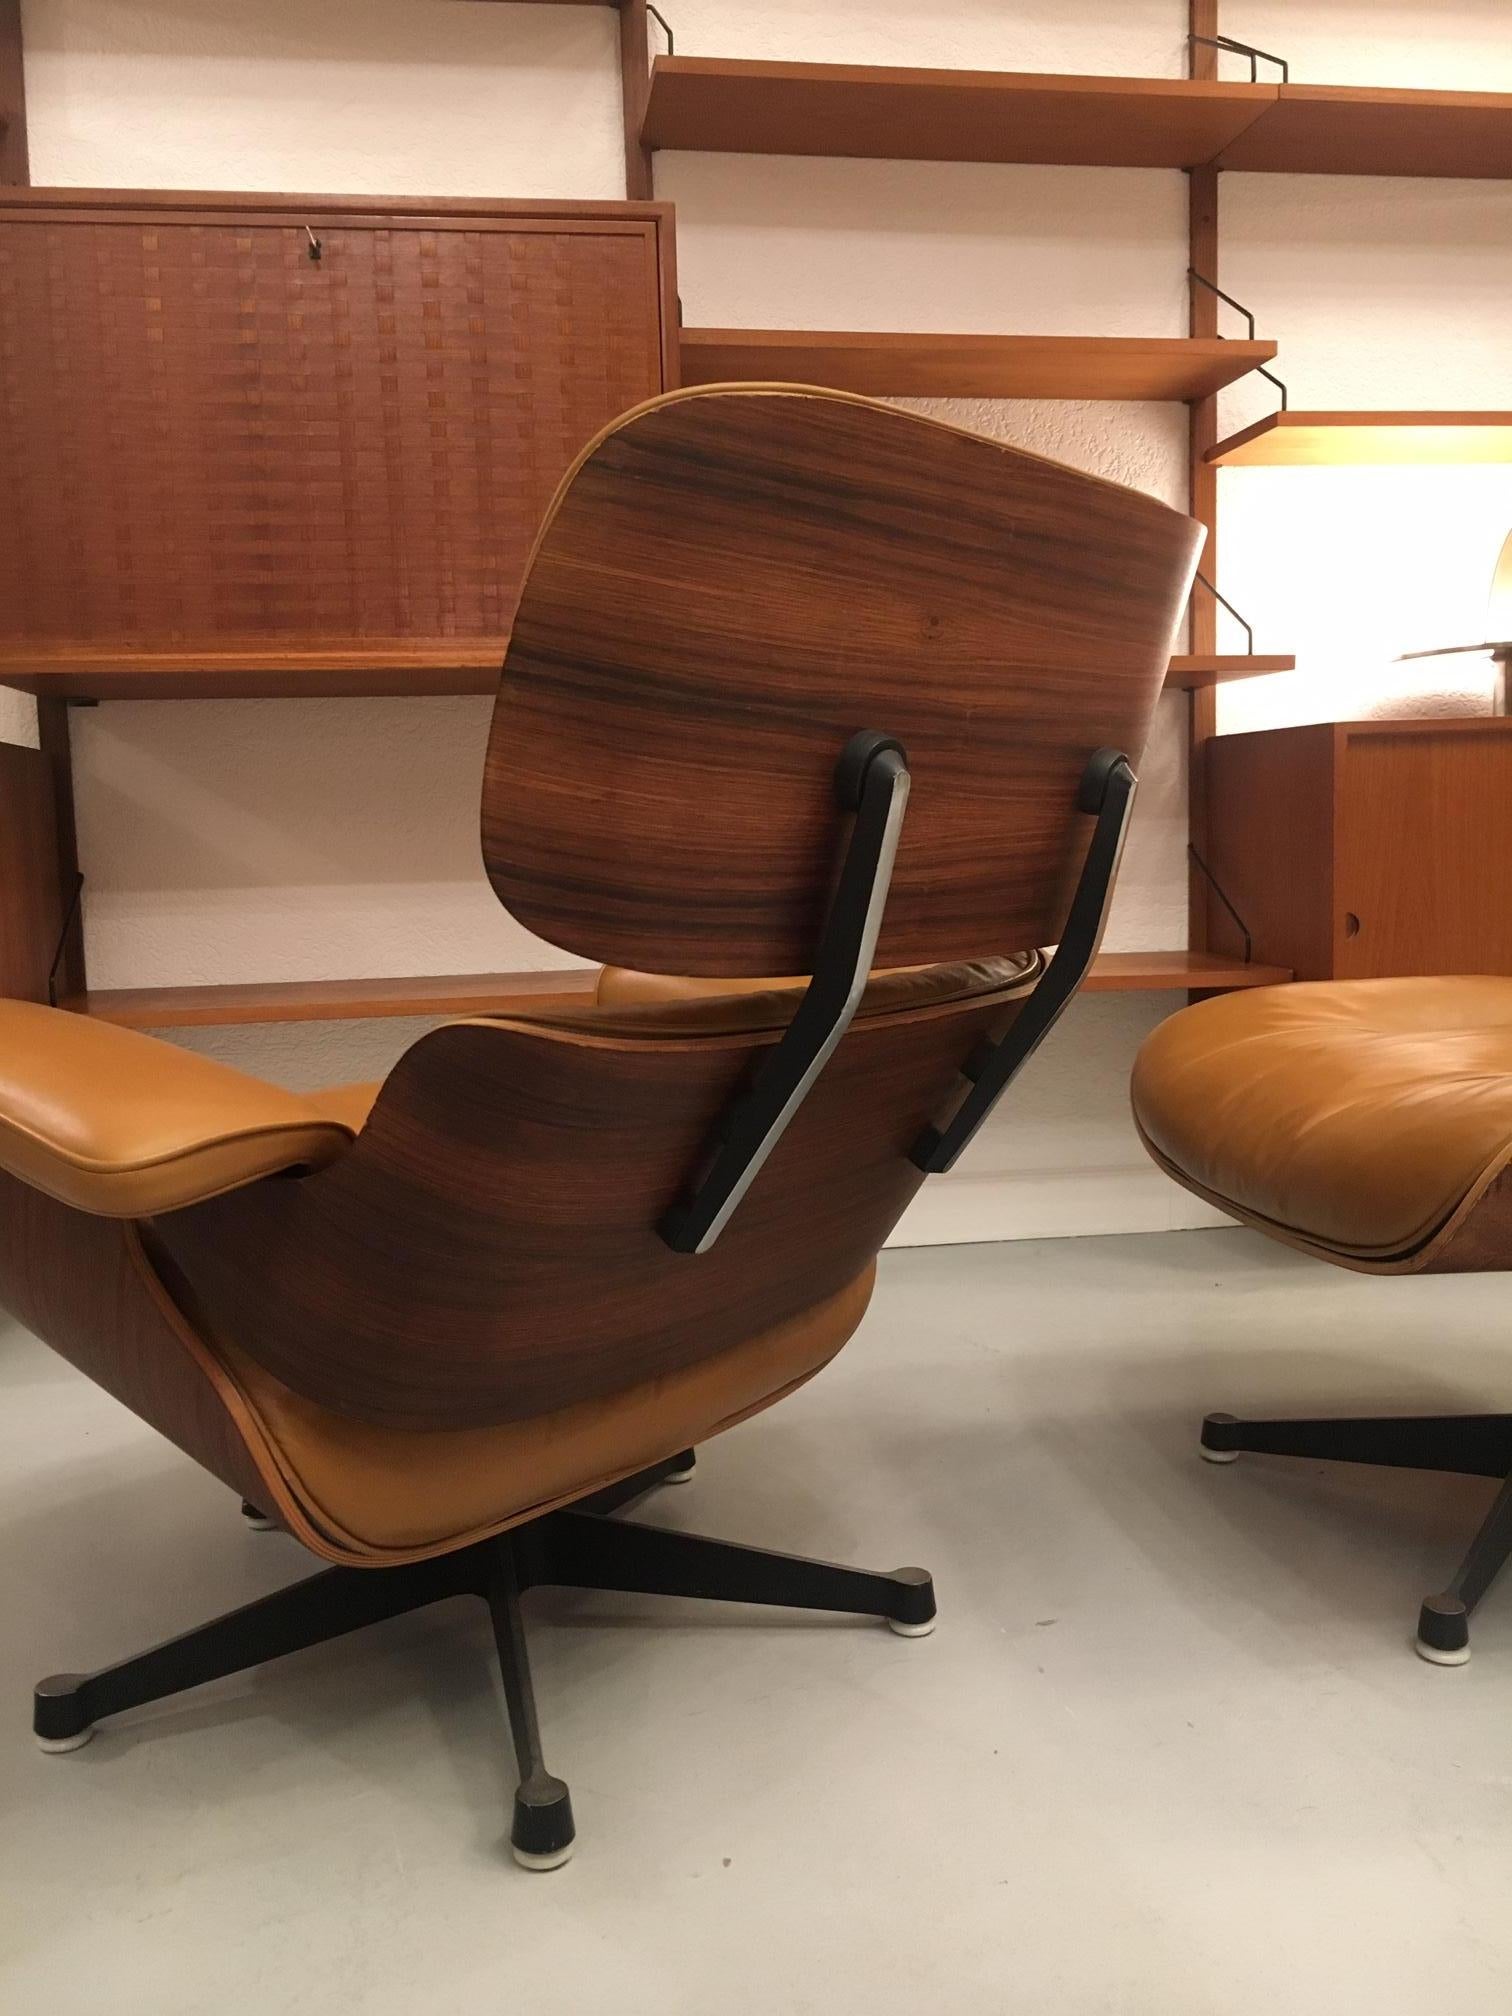 Late 20th Century Charles & Ray Eames Rosewood and Cognac Leather Lounge Chair, 1975